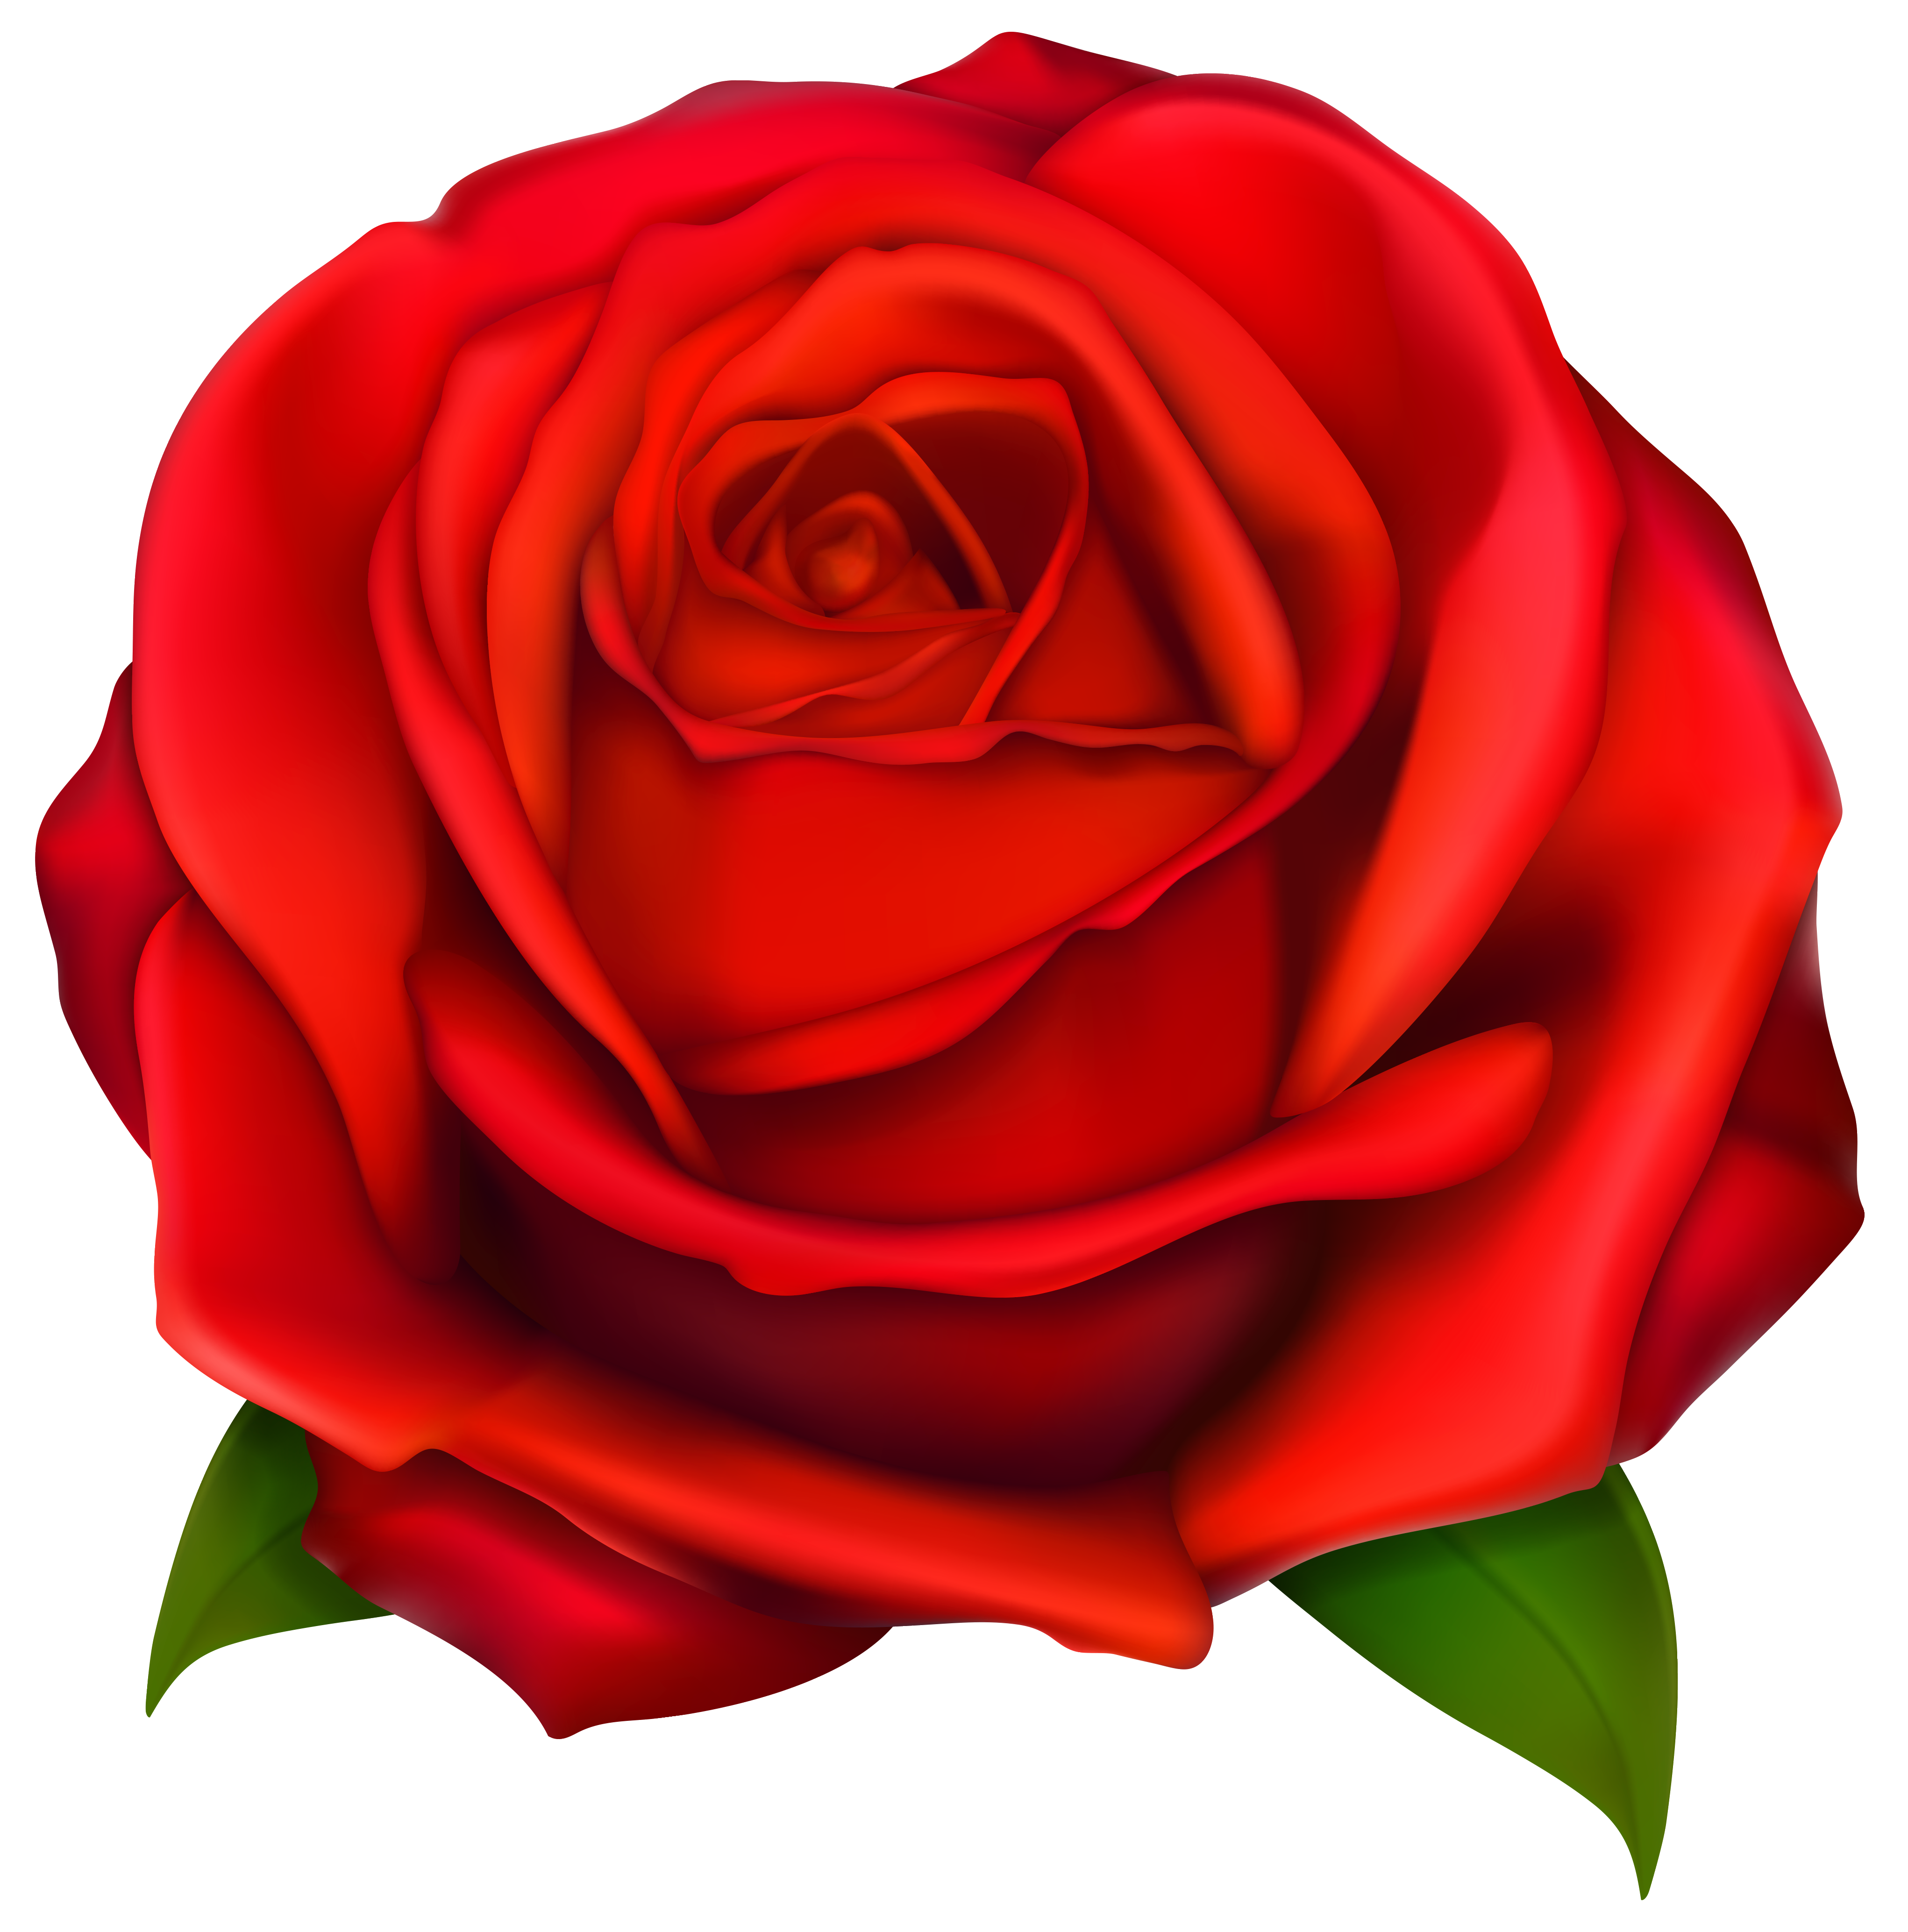 Image Of Clip Art Red Rose 7092 Red Roses Clip Art Images Free 